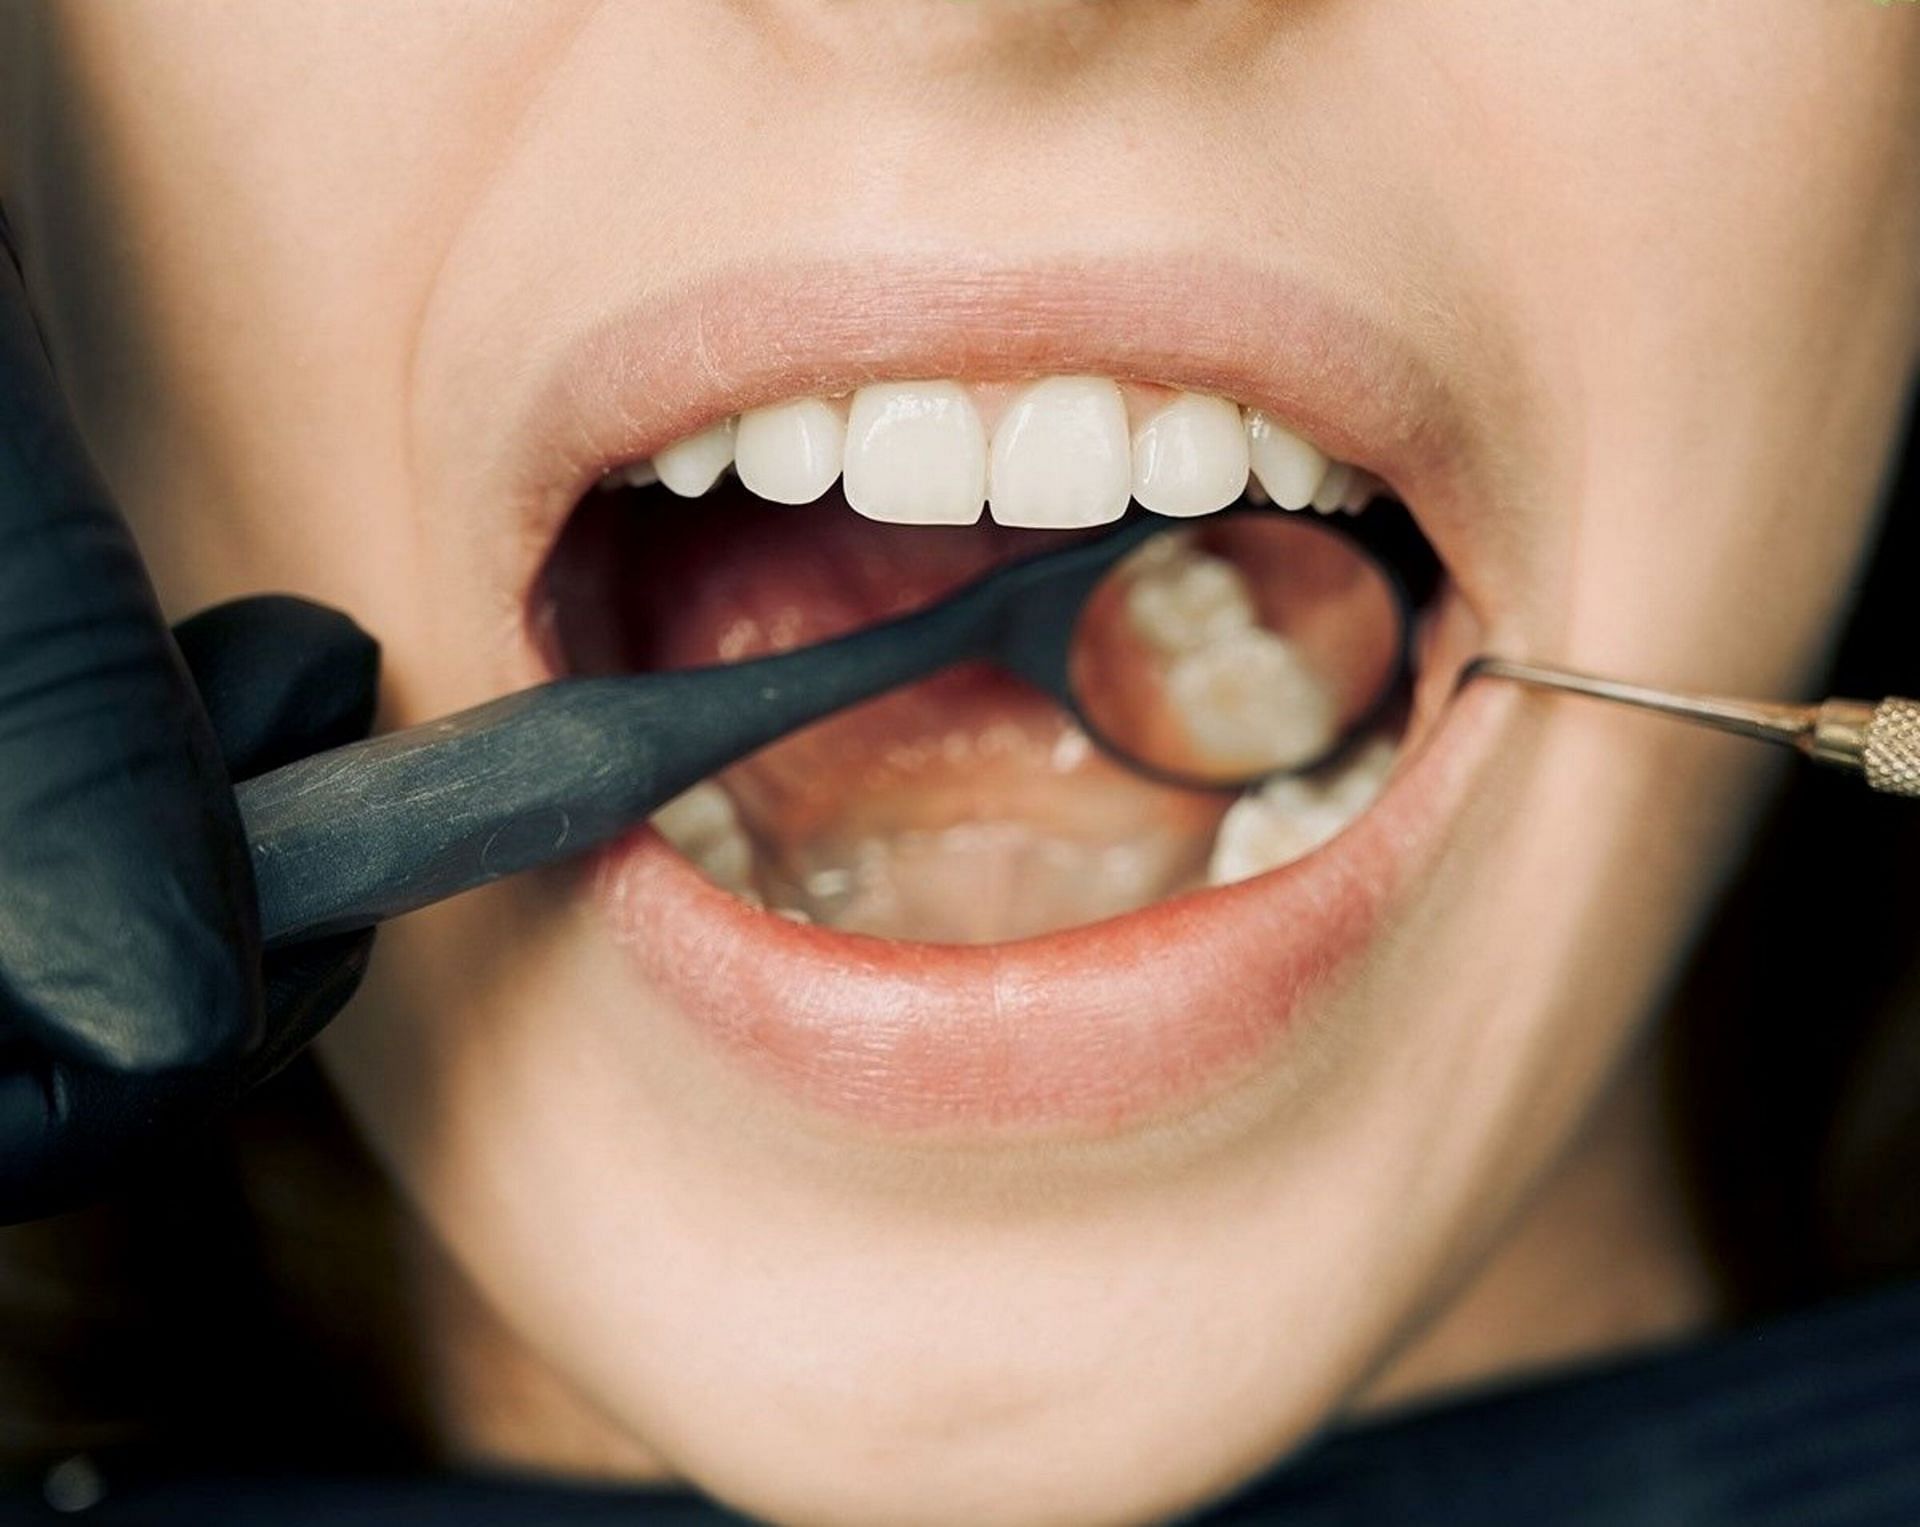 Maintaining good oral hygiene is crucial for keeping your teeth and gums healthy (Image via Pexels)